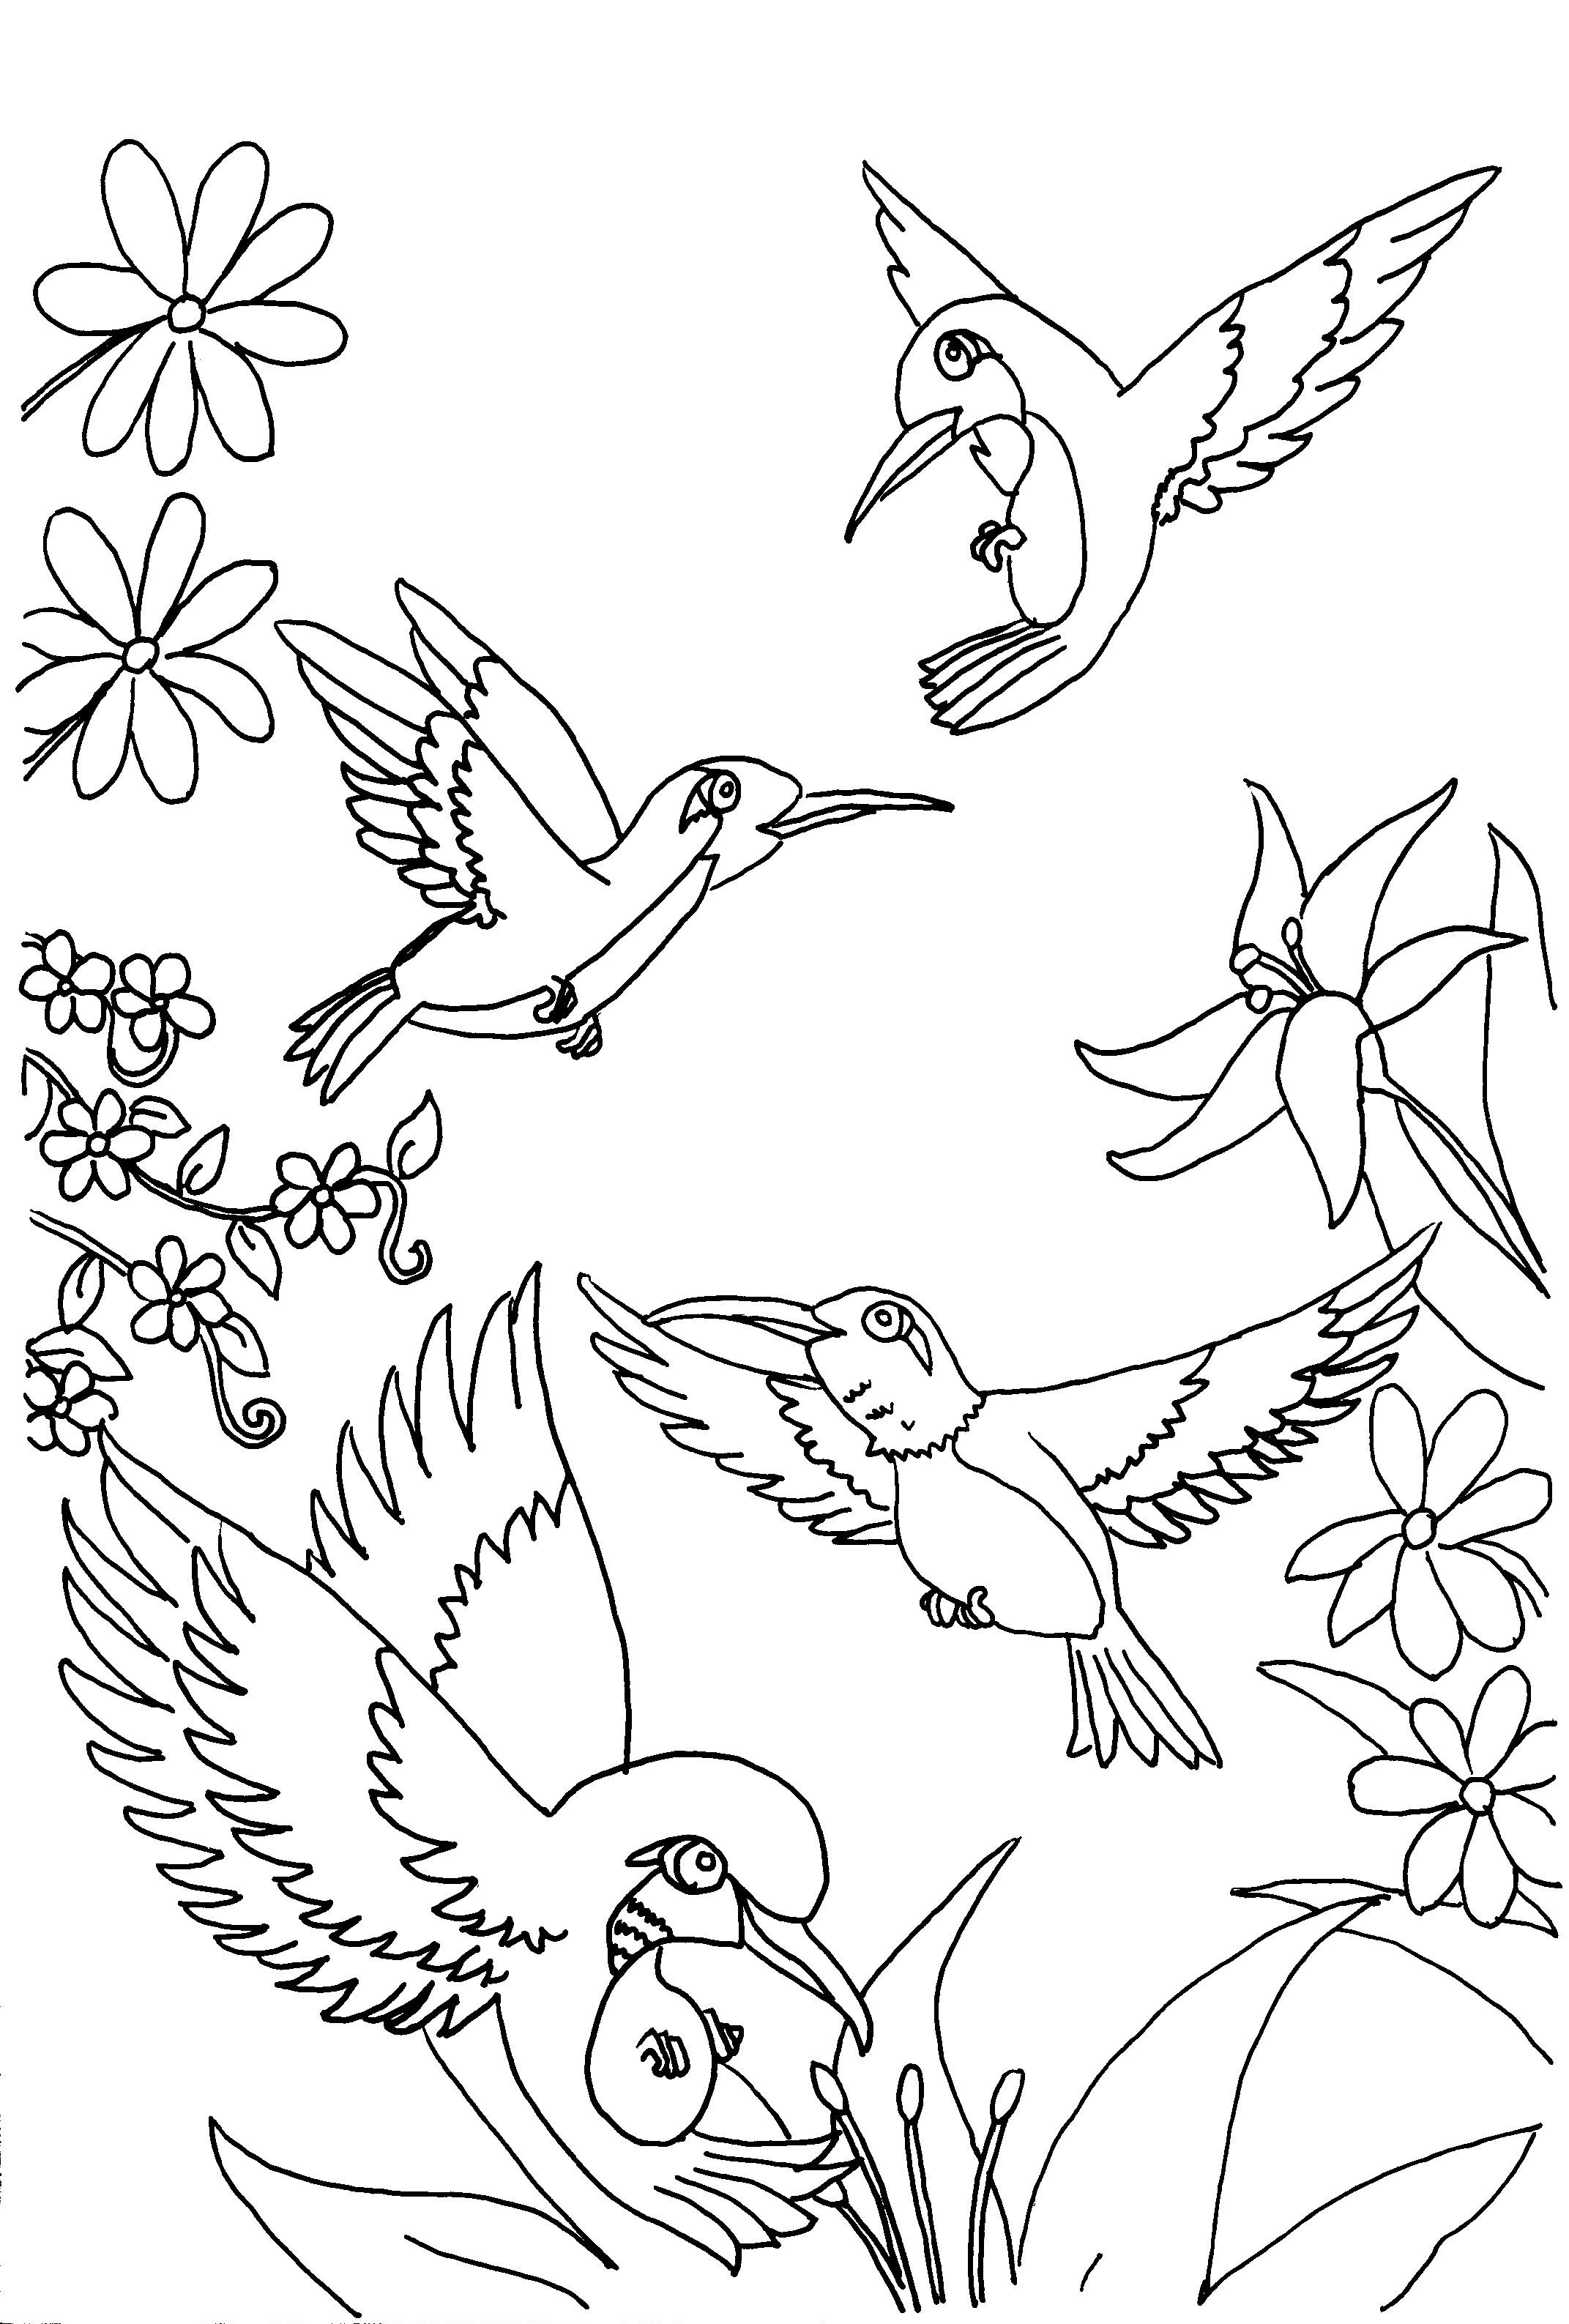 Printable Coloring Pages For Toddlers Free
 Free Printable Hummingbird Coloring Pages For Kids